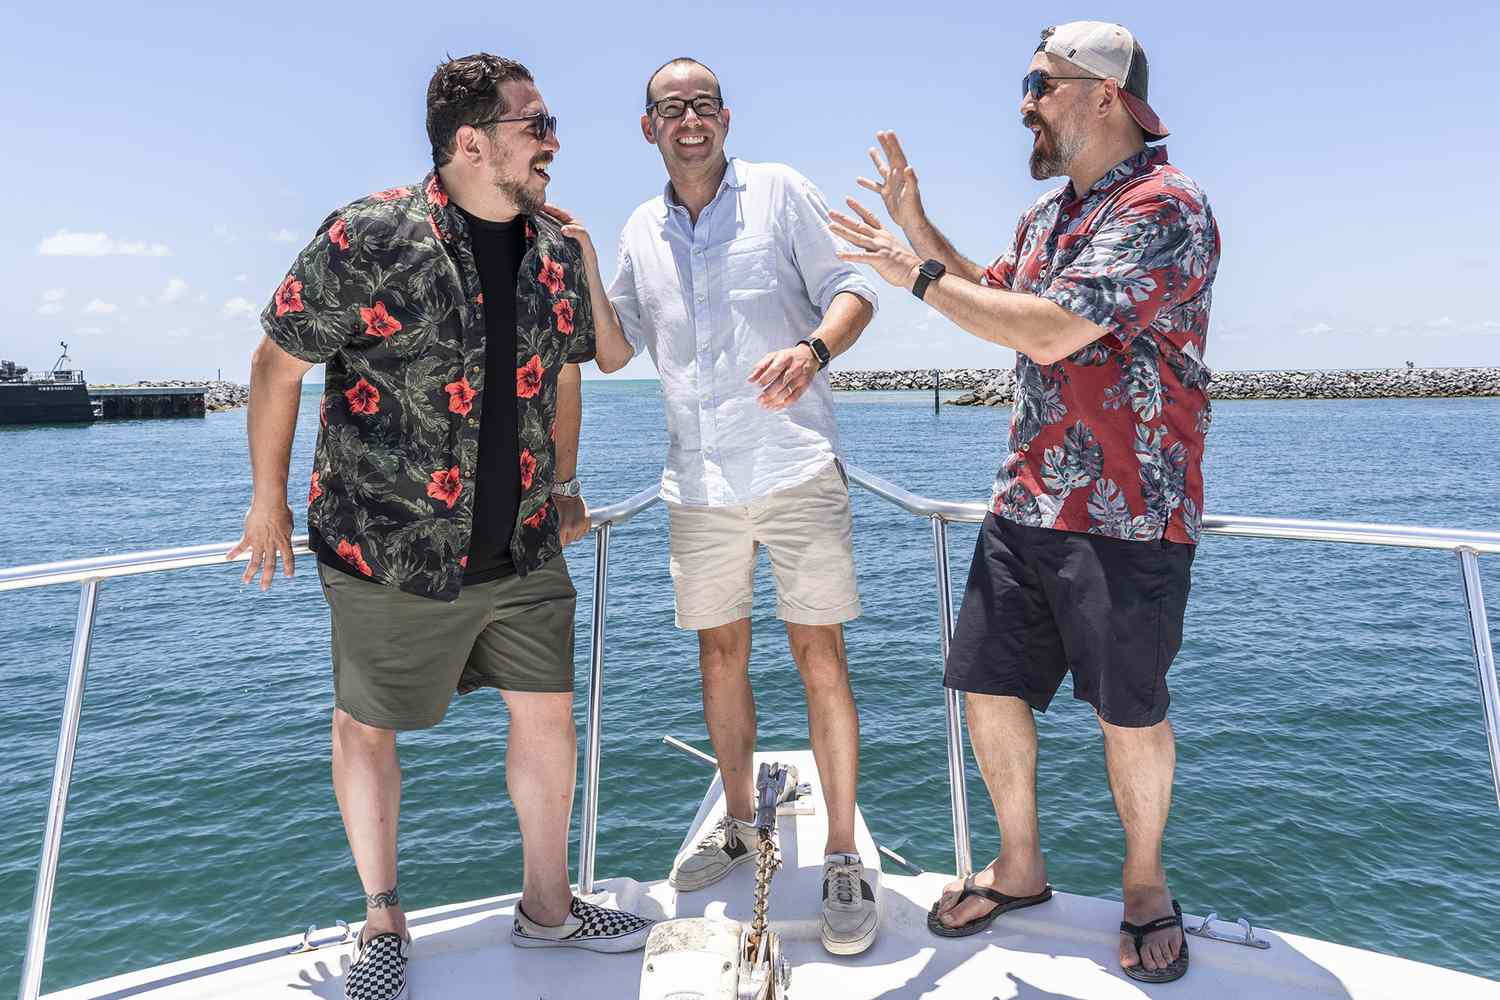 Three comedians and lifelong friends compete to embarrass each other amongst the general public with a series of hilarious and outrageous dares, as seen on Discovery’s Shark Week special at the Blue Lagoon resort in the Bahamas.